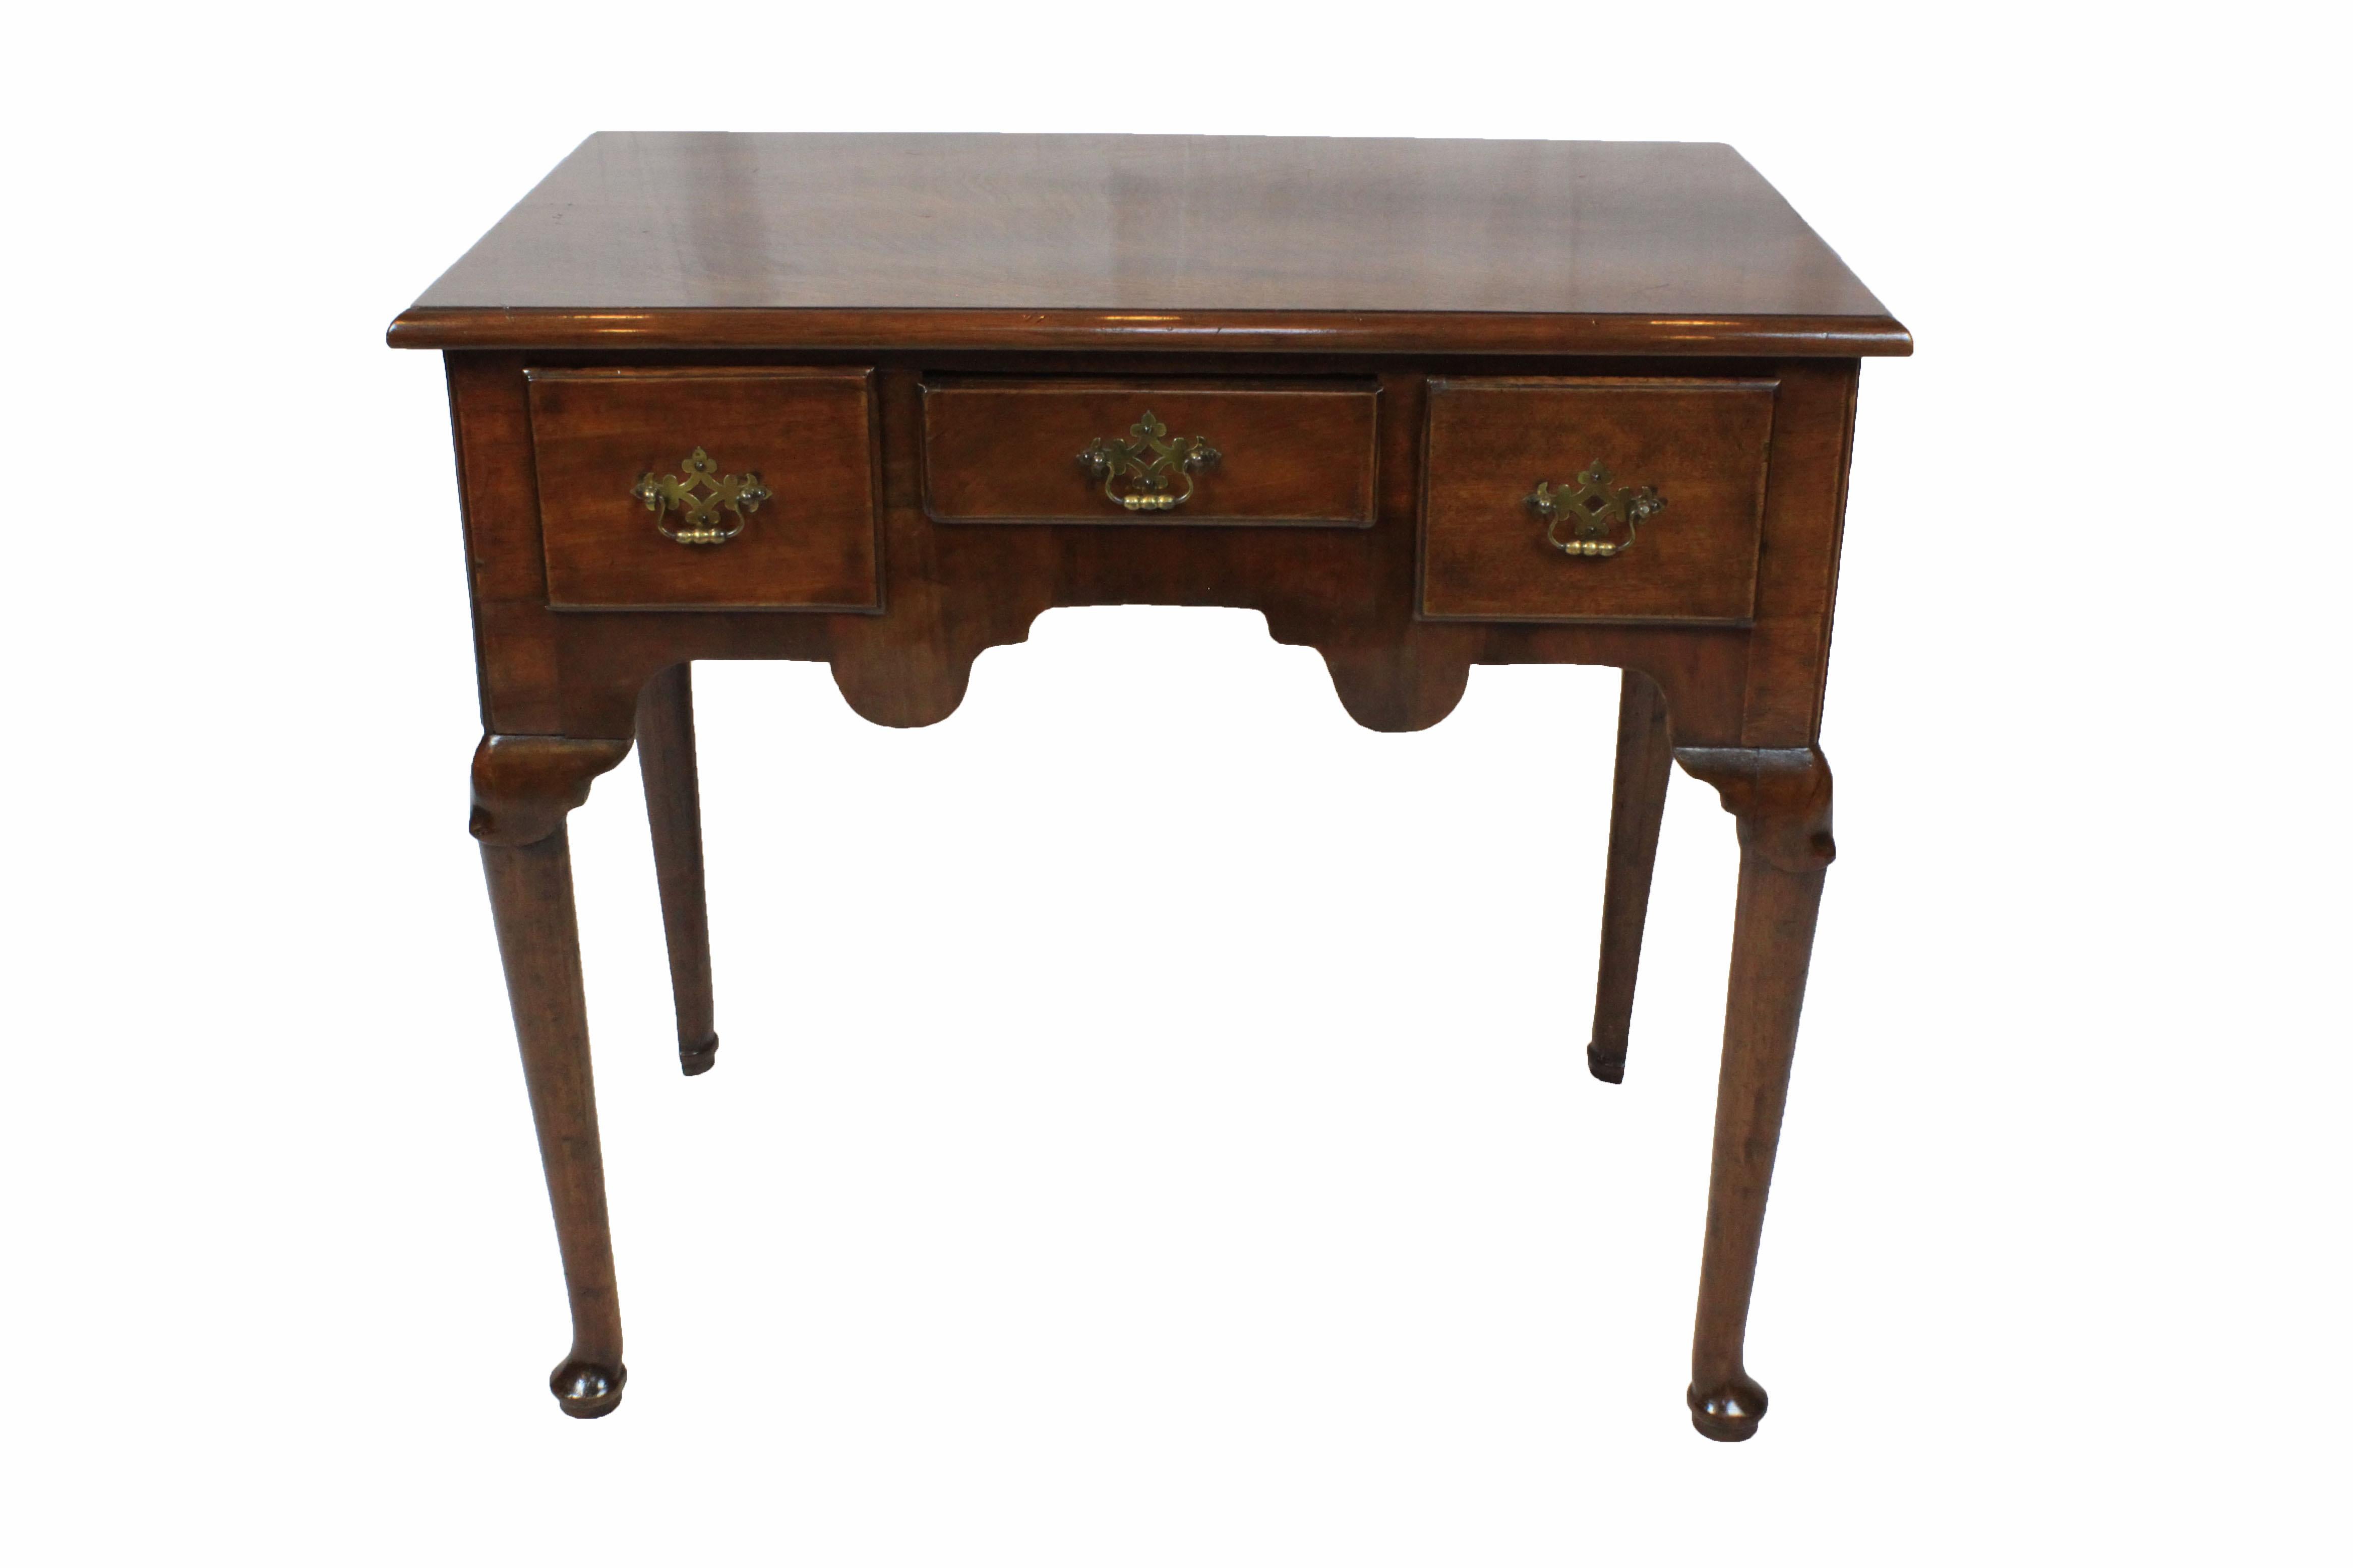 George III walnut lowboy with solid top, standing on straight Queen Anne legs with carved poleyn style knees and ending in pad feet. Unusually shaped rear legs.